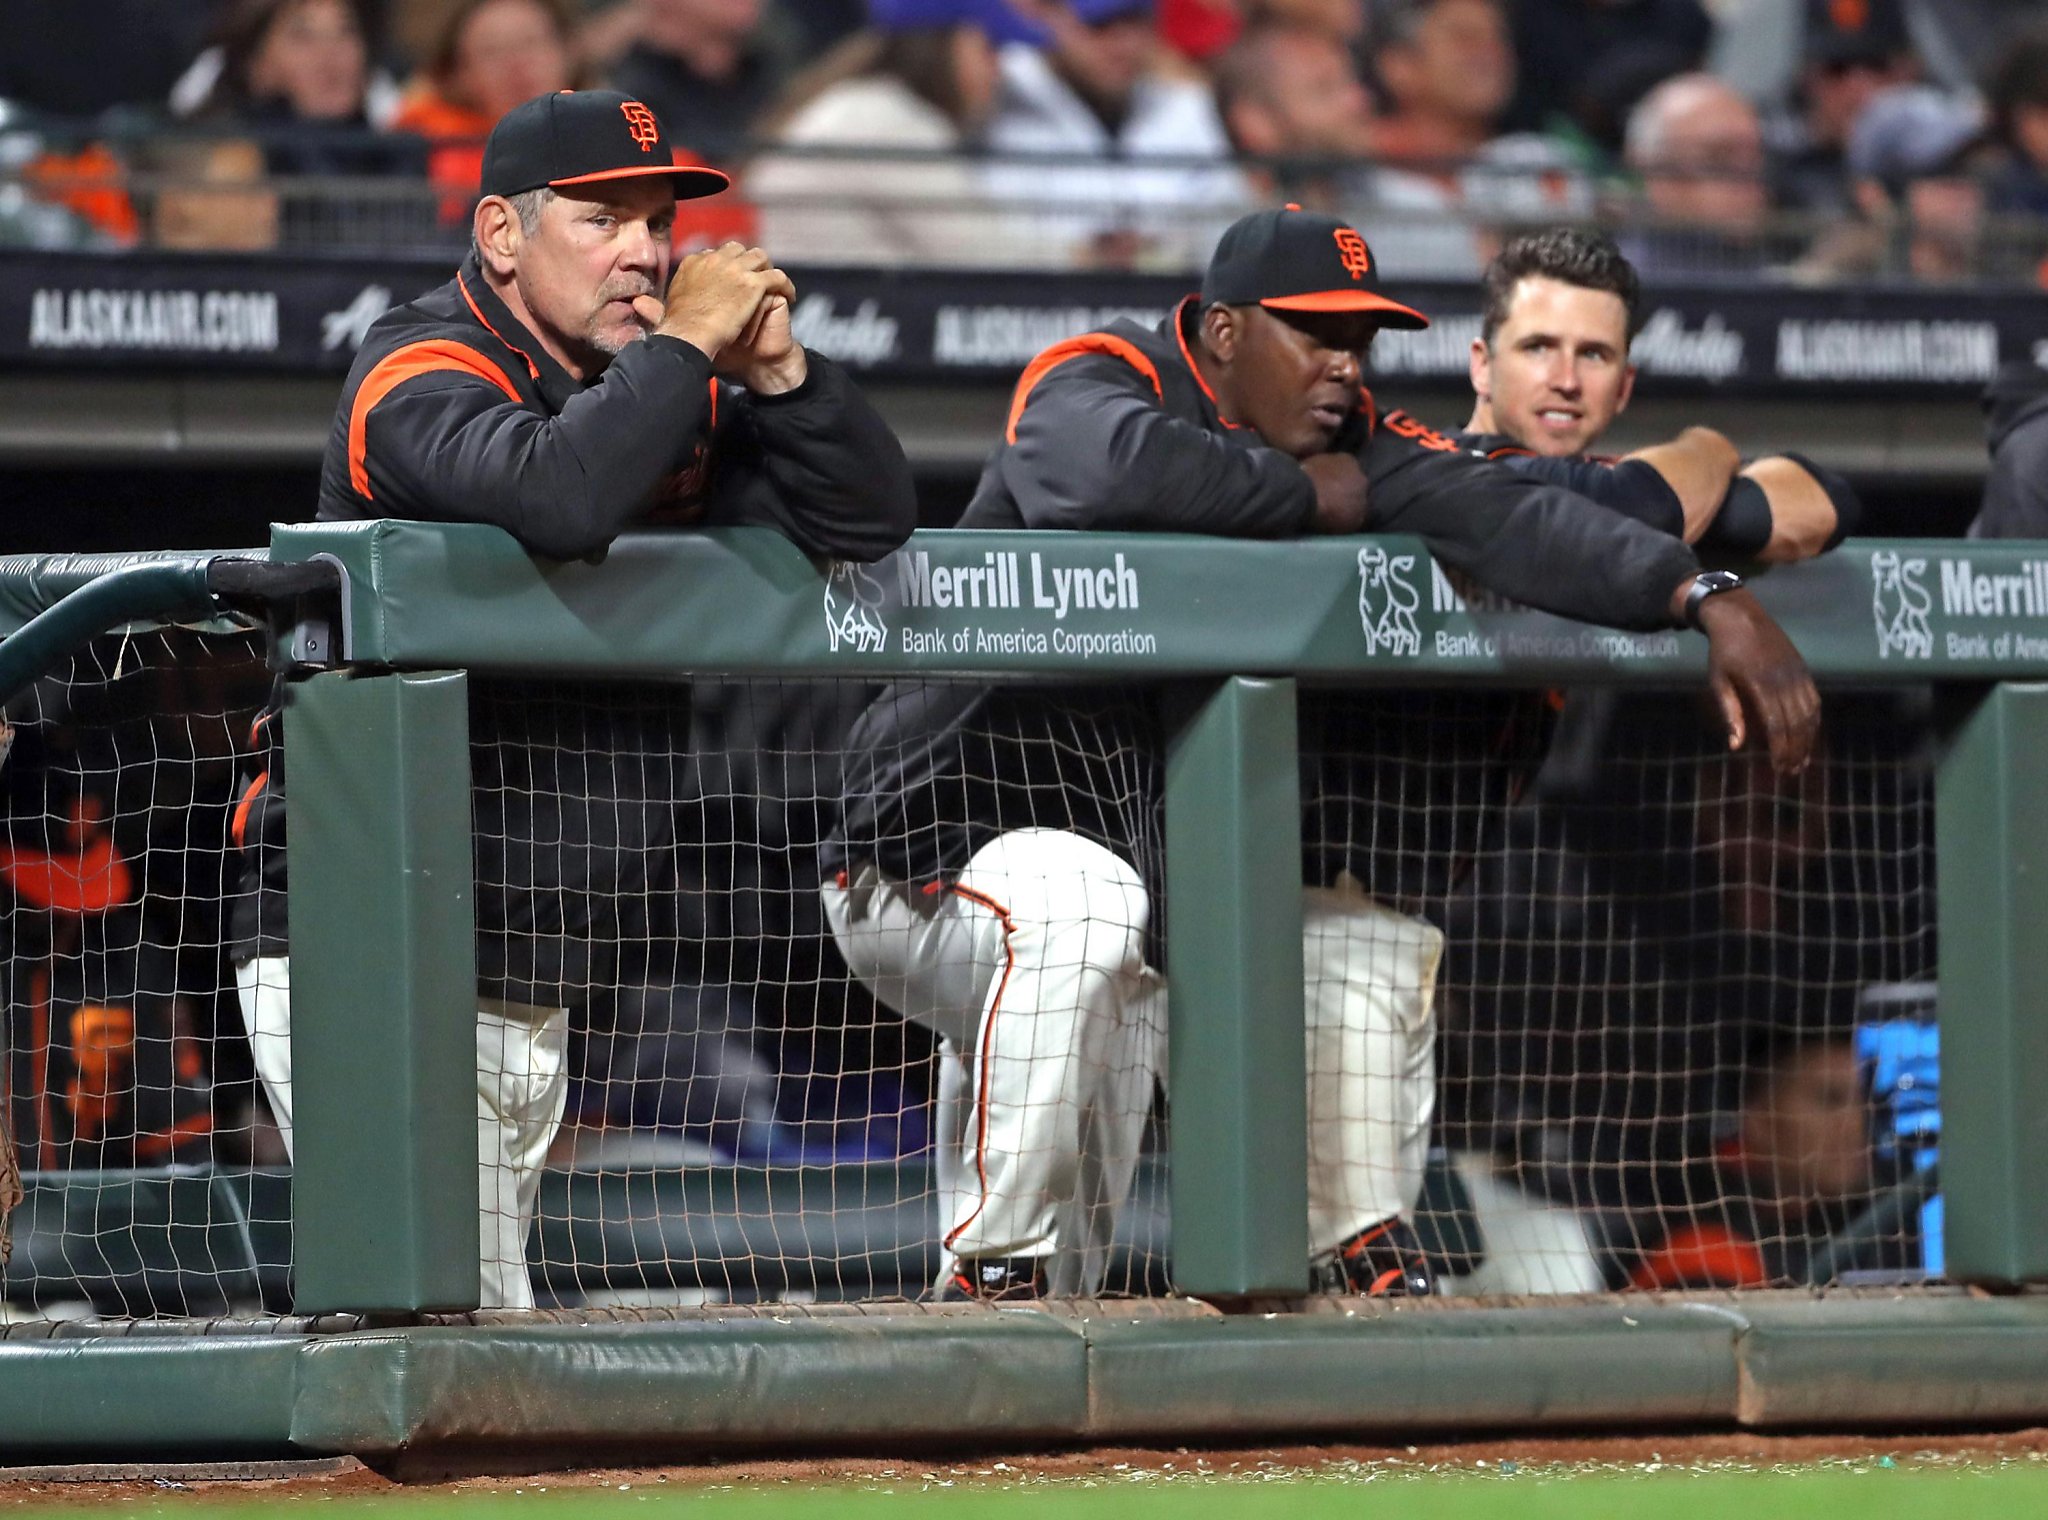 Giants' bullpen to get a boost with roster expansion